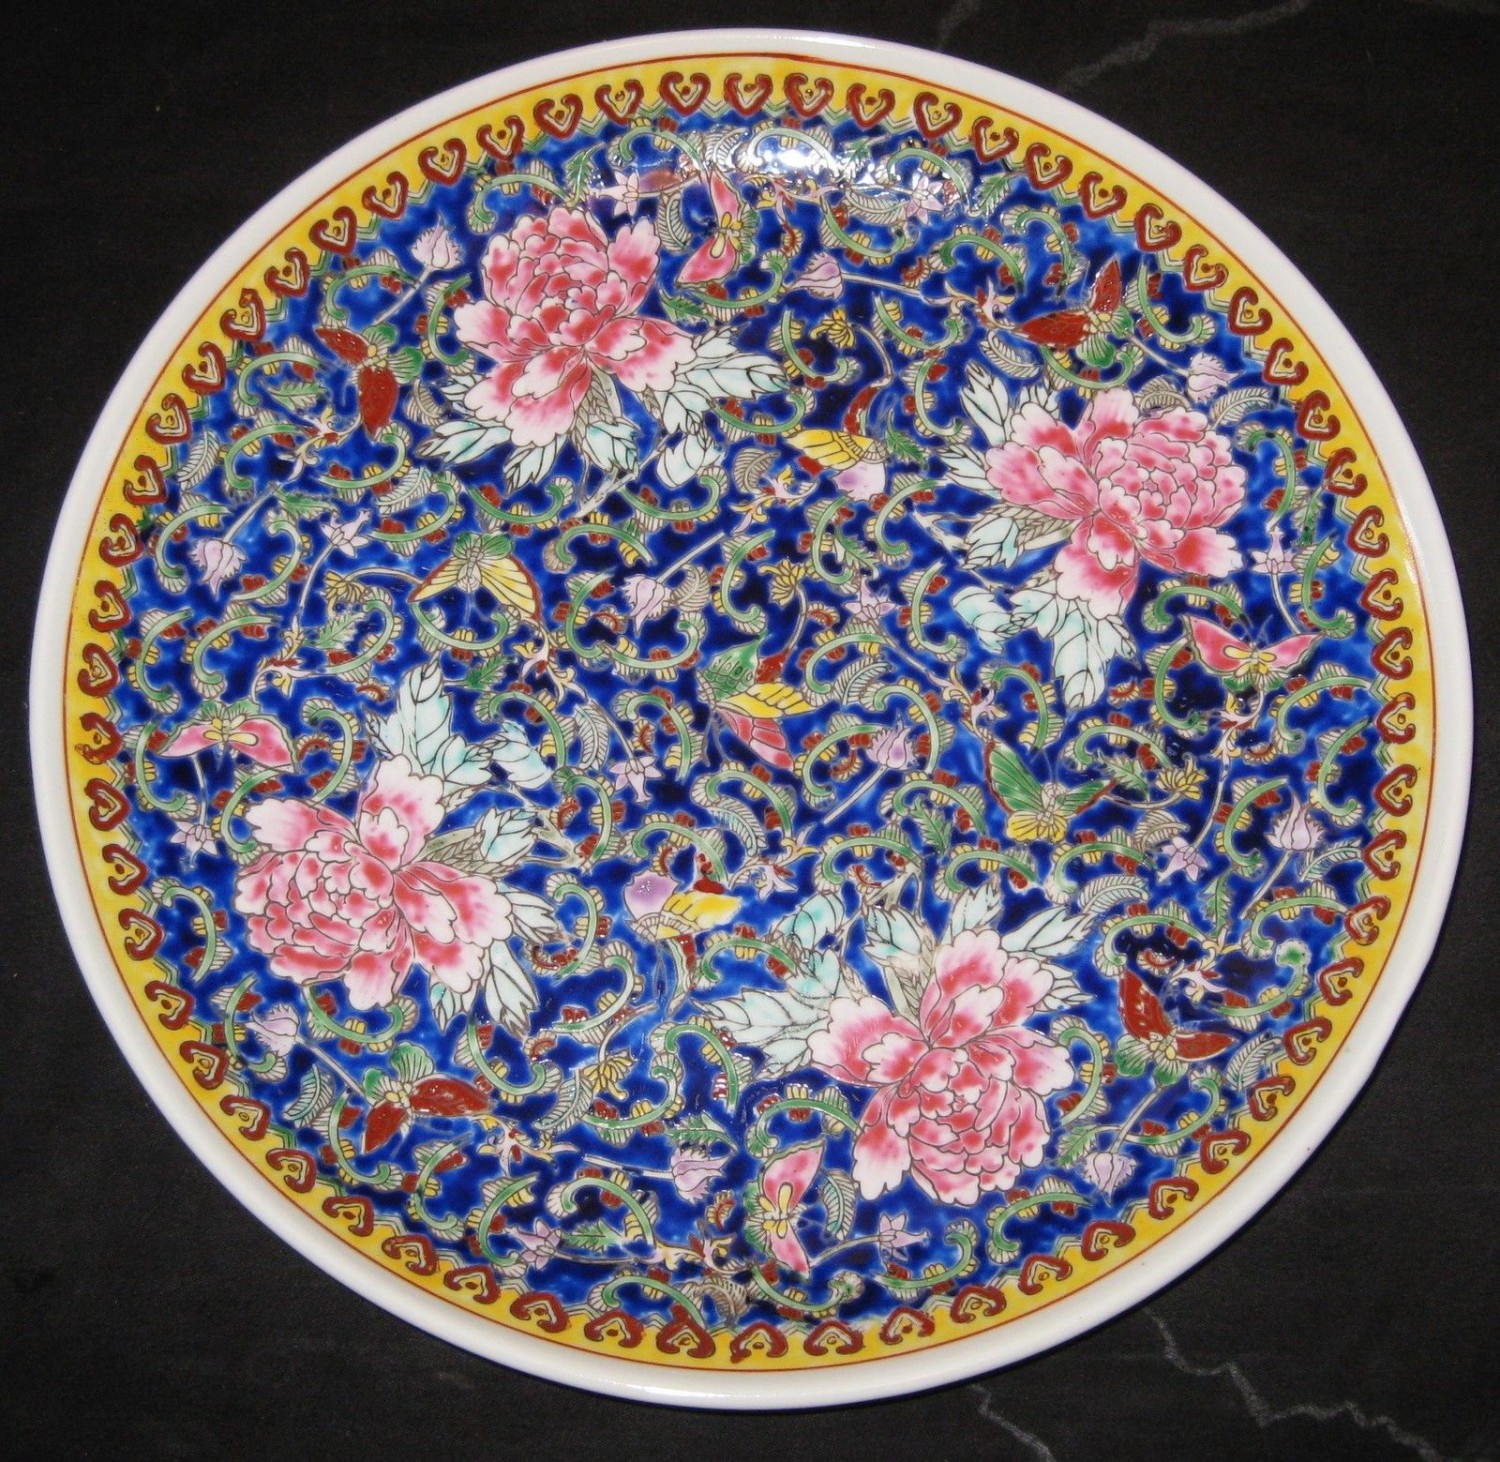 ANTIQUE CHINESE FAMILLE ROSE PORCELAIN CHARGER PLATE,19TH C., QIANLONG MARK.